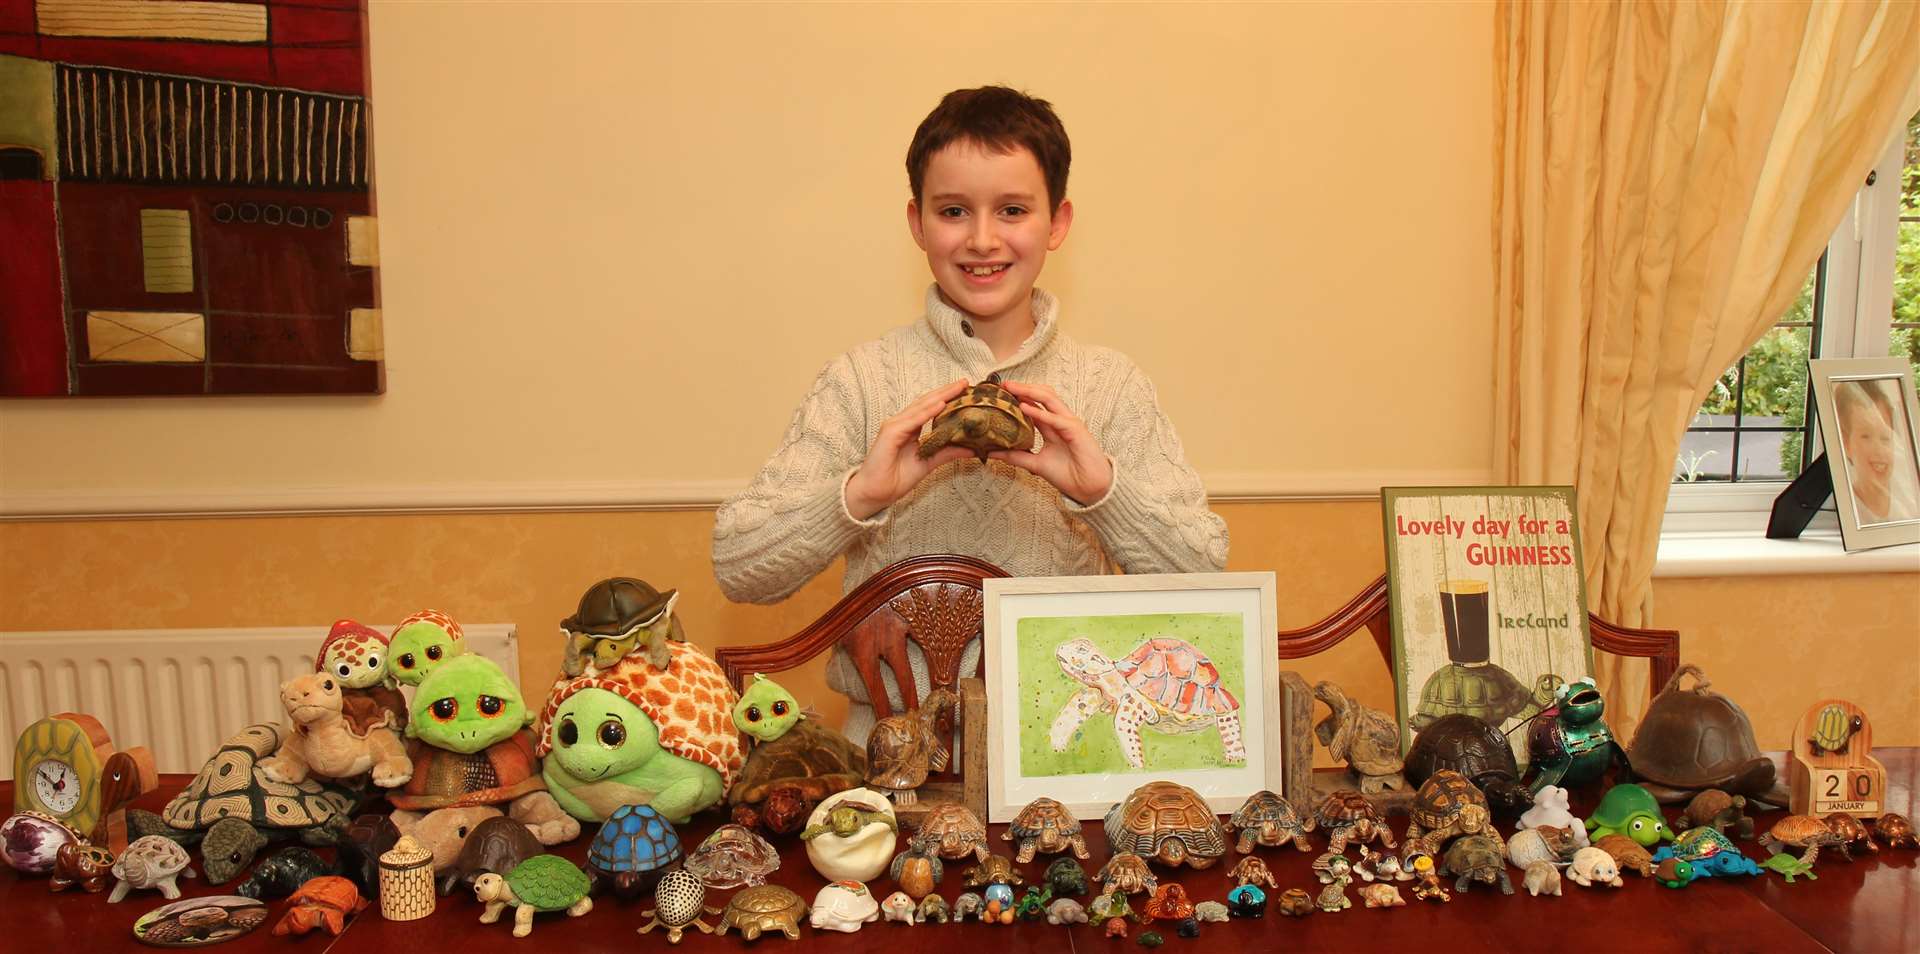 Cameron with his pet tortoise and some of his collection